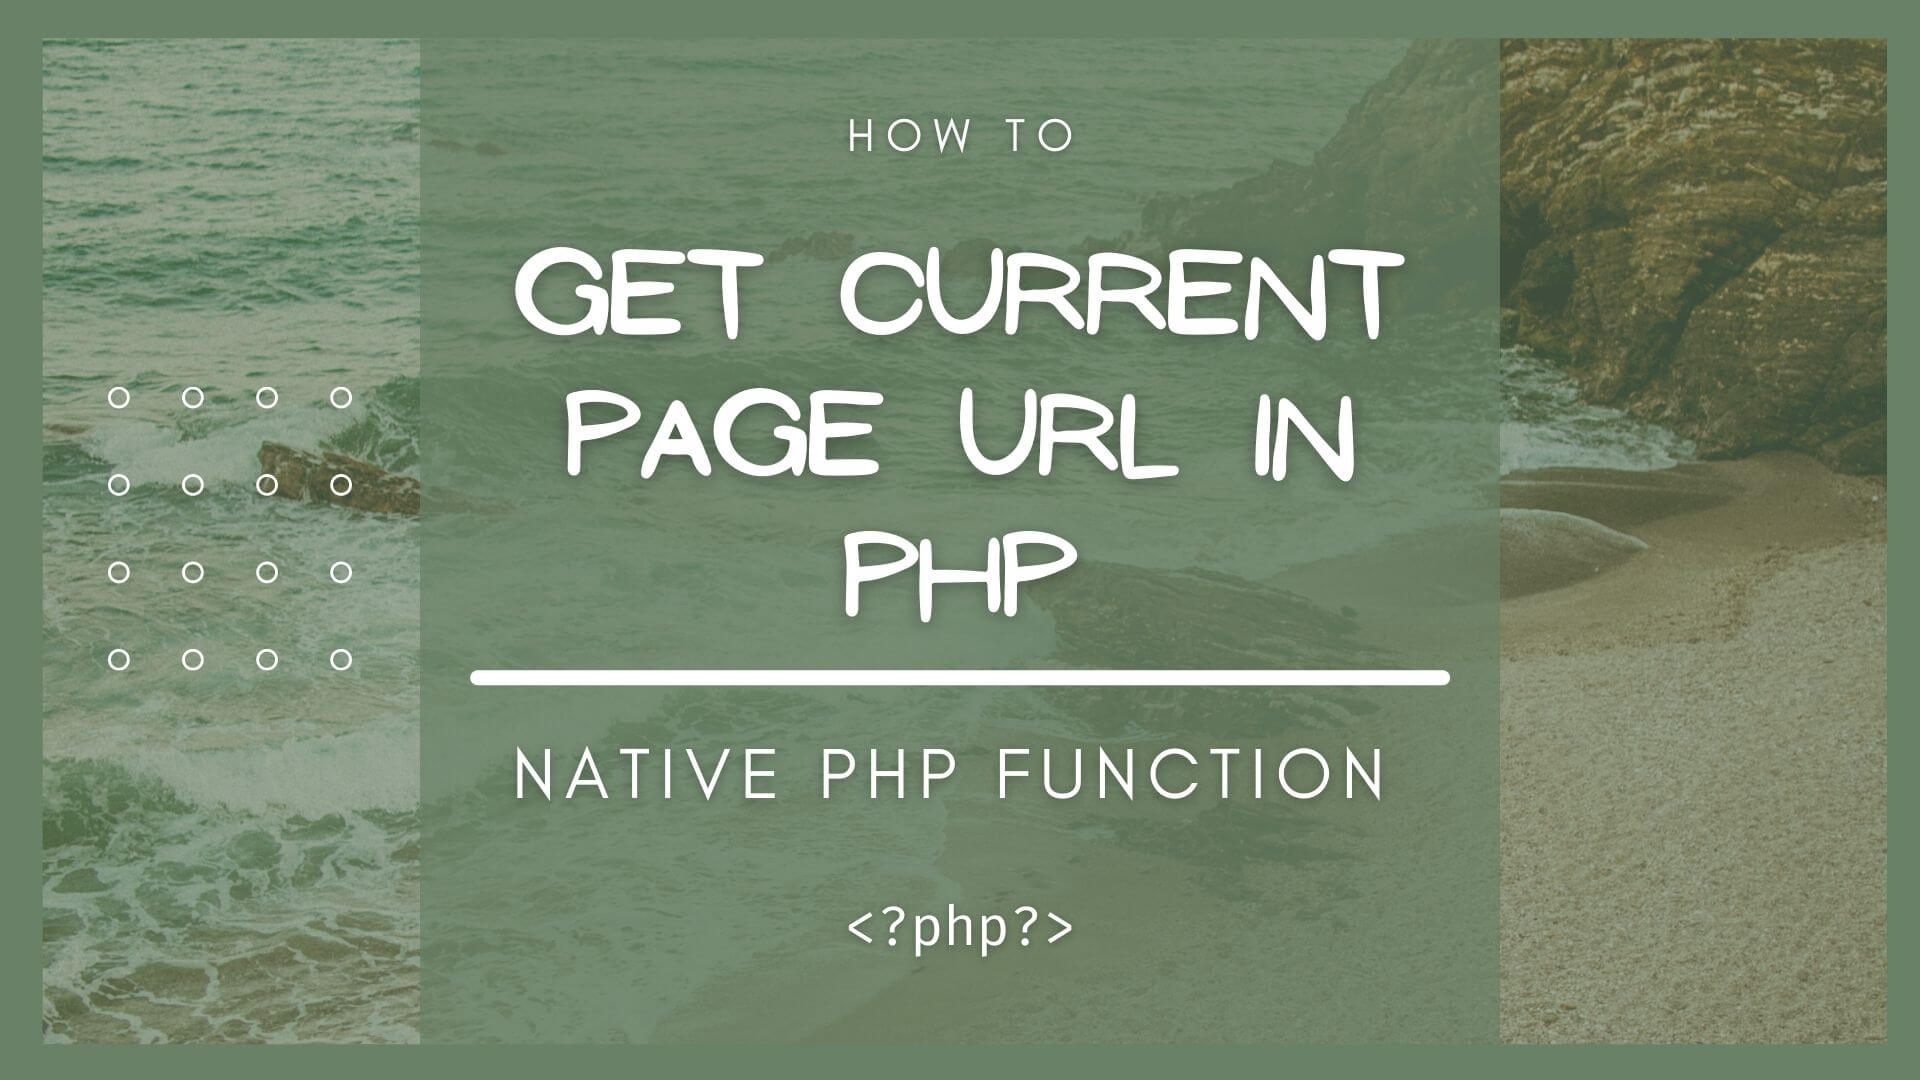 Get current page URL in PHP